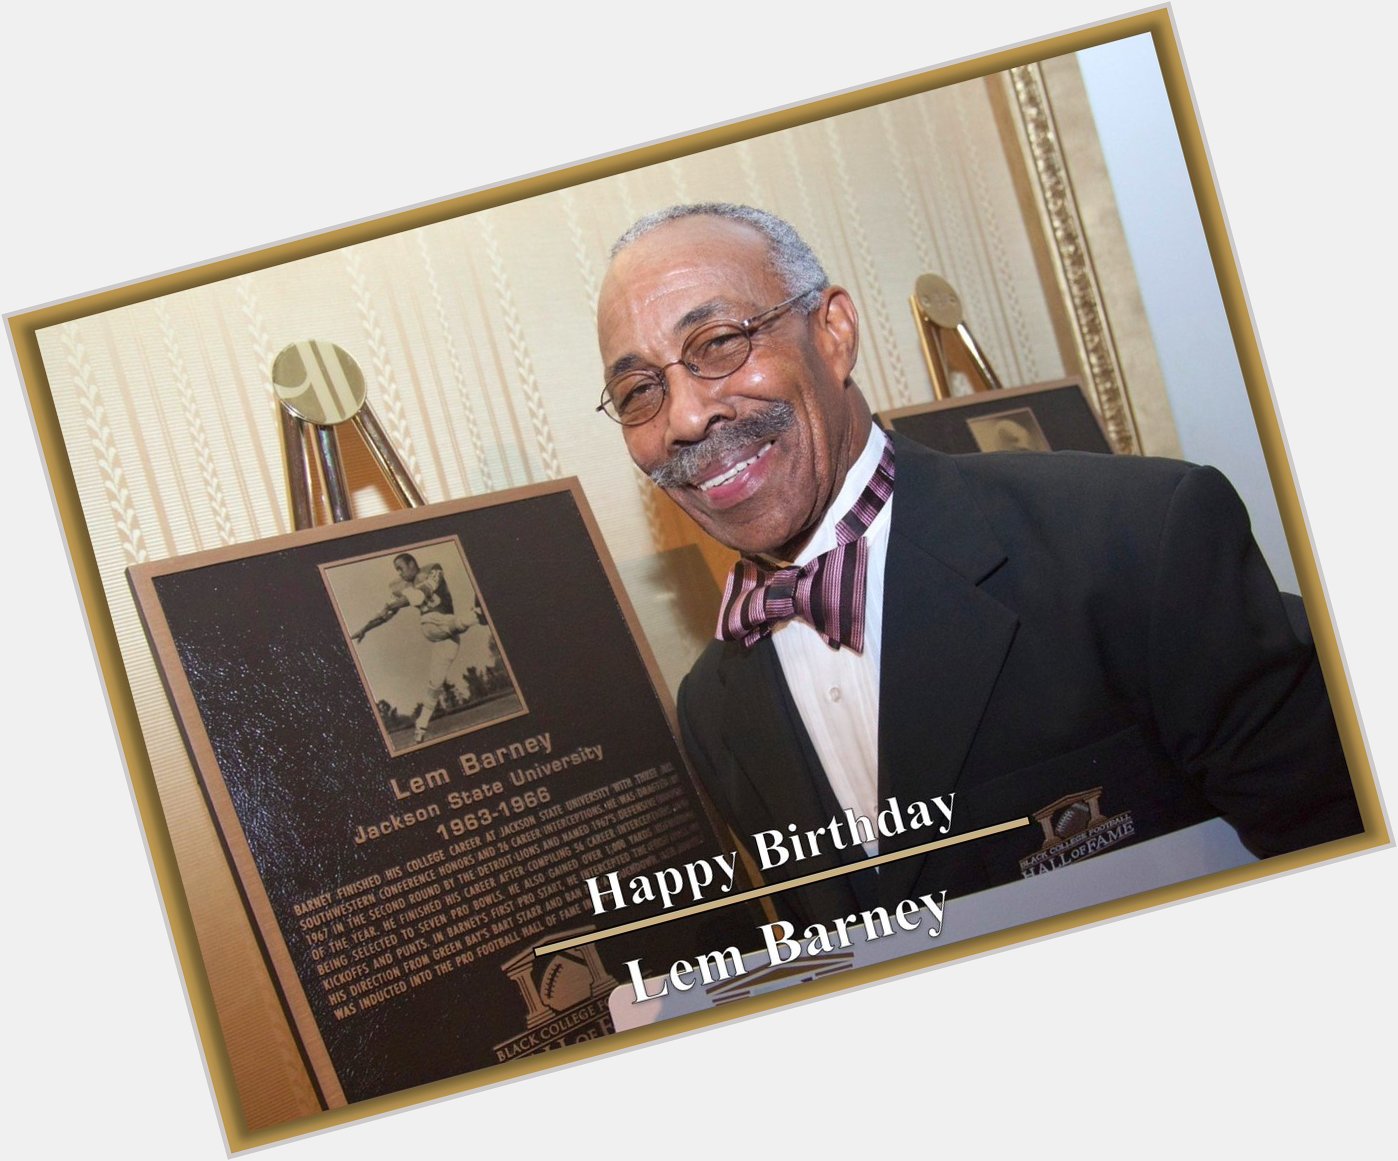 Happy birthday to Black College Football Hall of Fame Class of 2011 Inductee, Lem Barney!
 